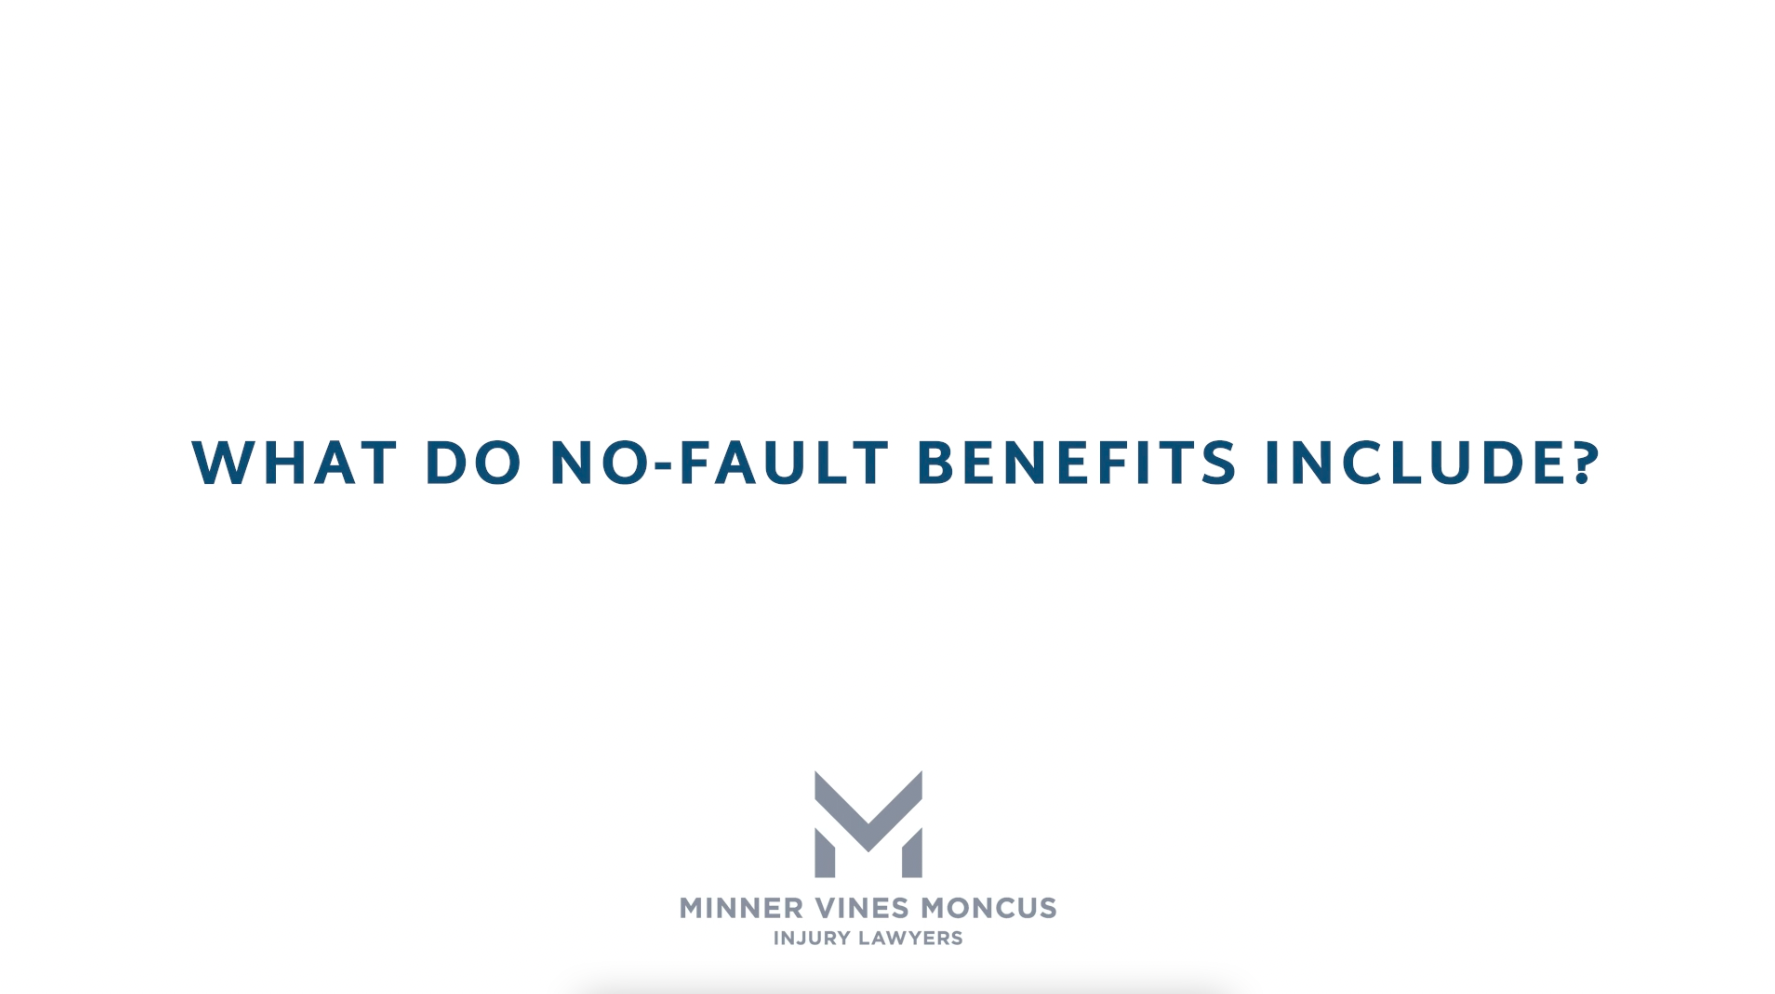 What do no-fault benefits include?